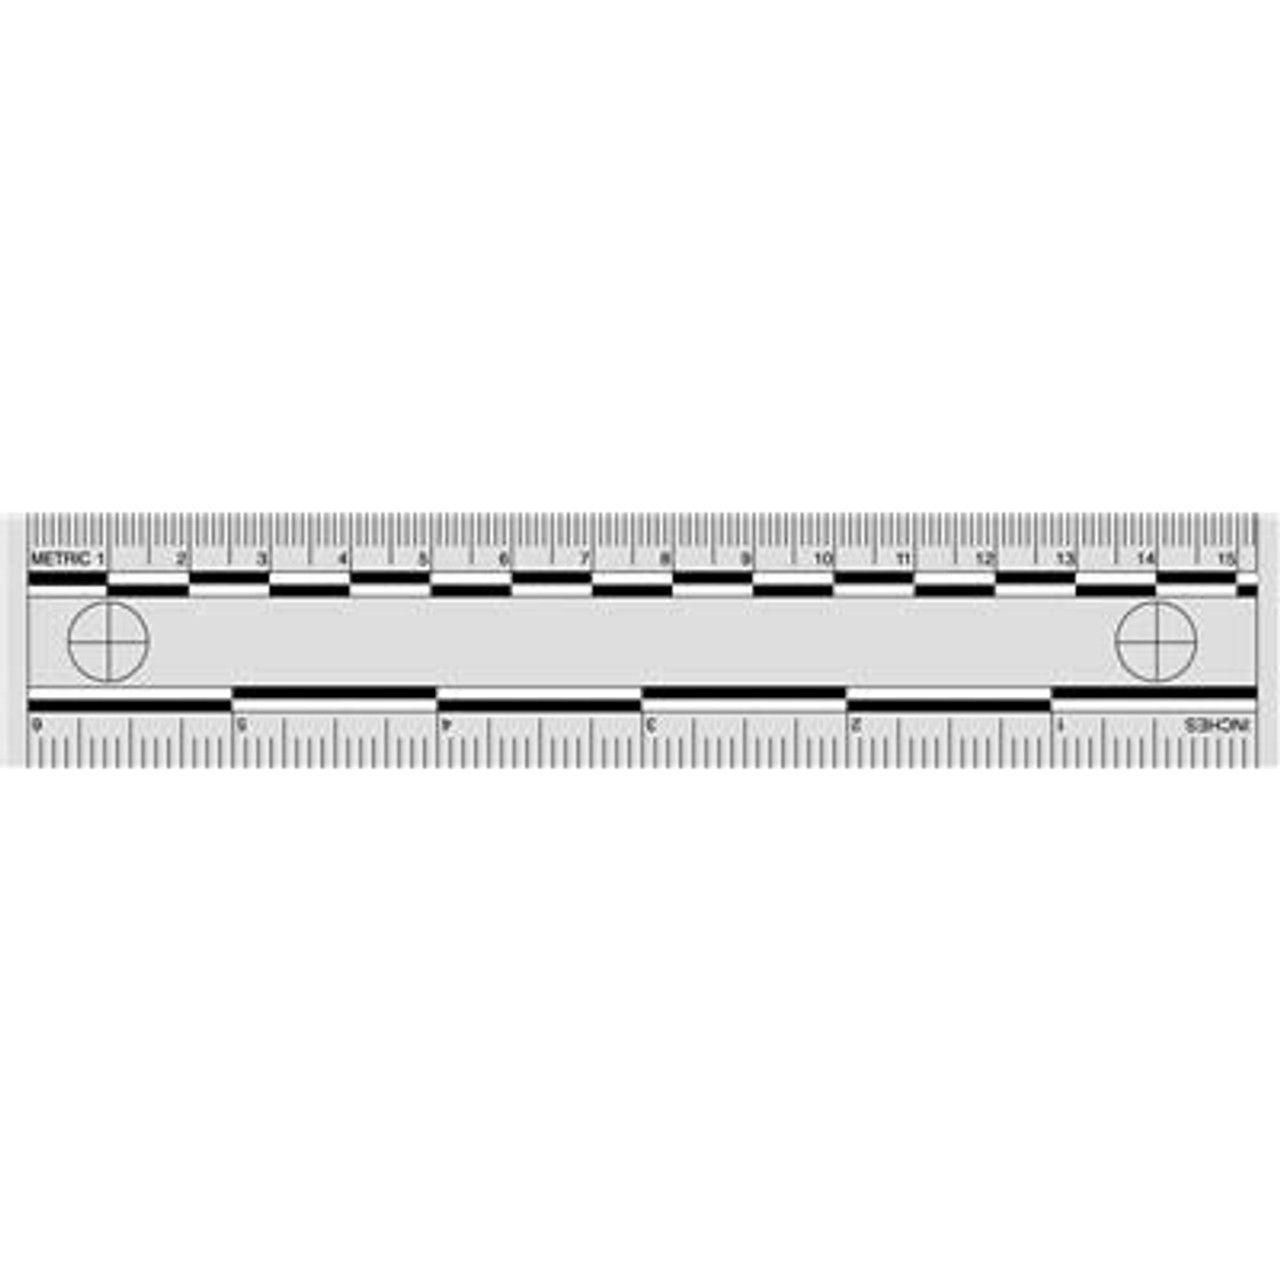 ATF 6 Inch Ruler - EOD Gear Forensics and SSE Solutions